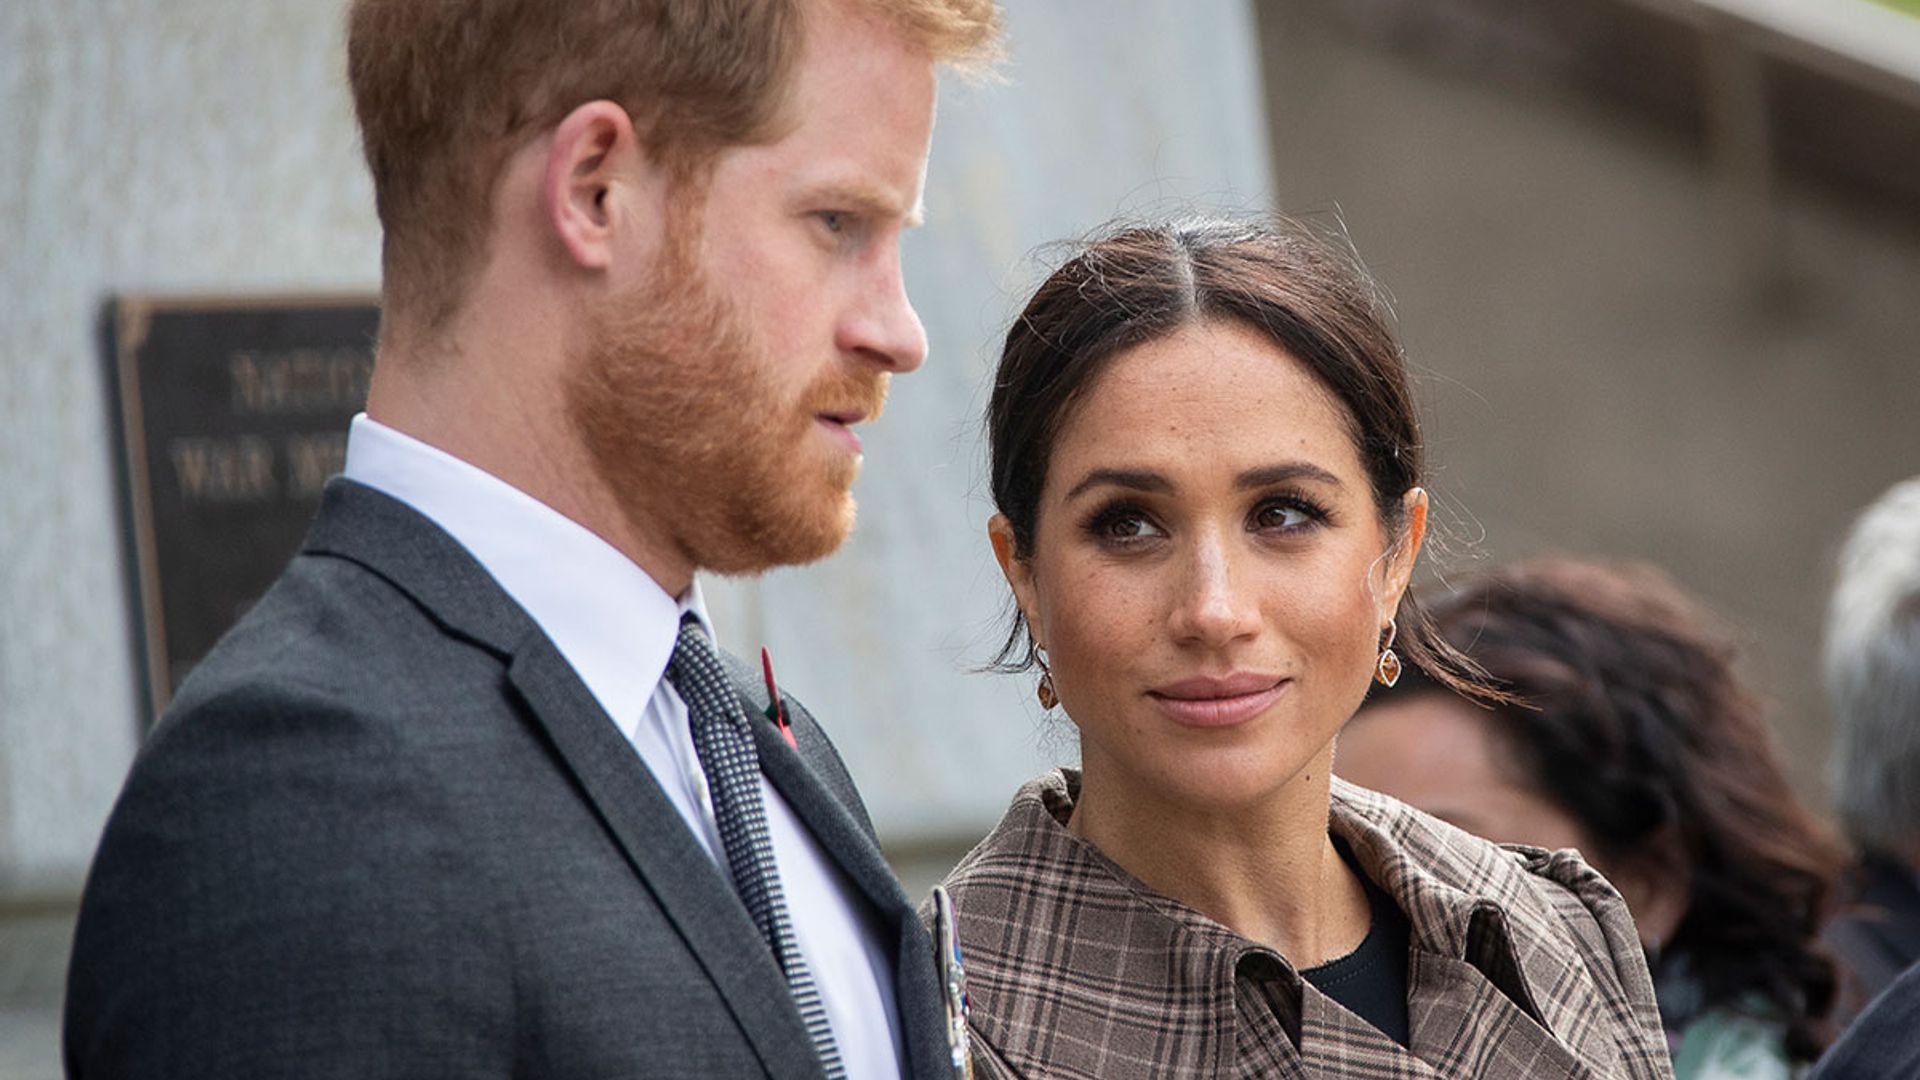 Meghan Markle and Prince Harry share deeply personal statement about  'suffering and pain' in the world | HELLO!